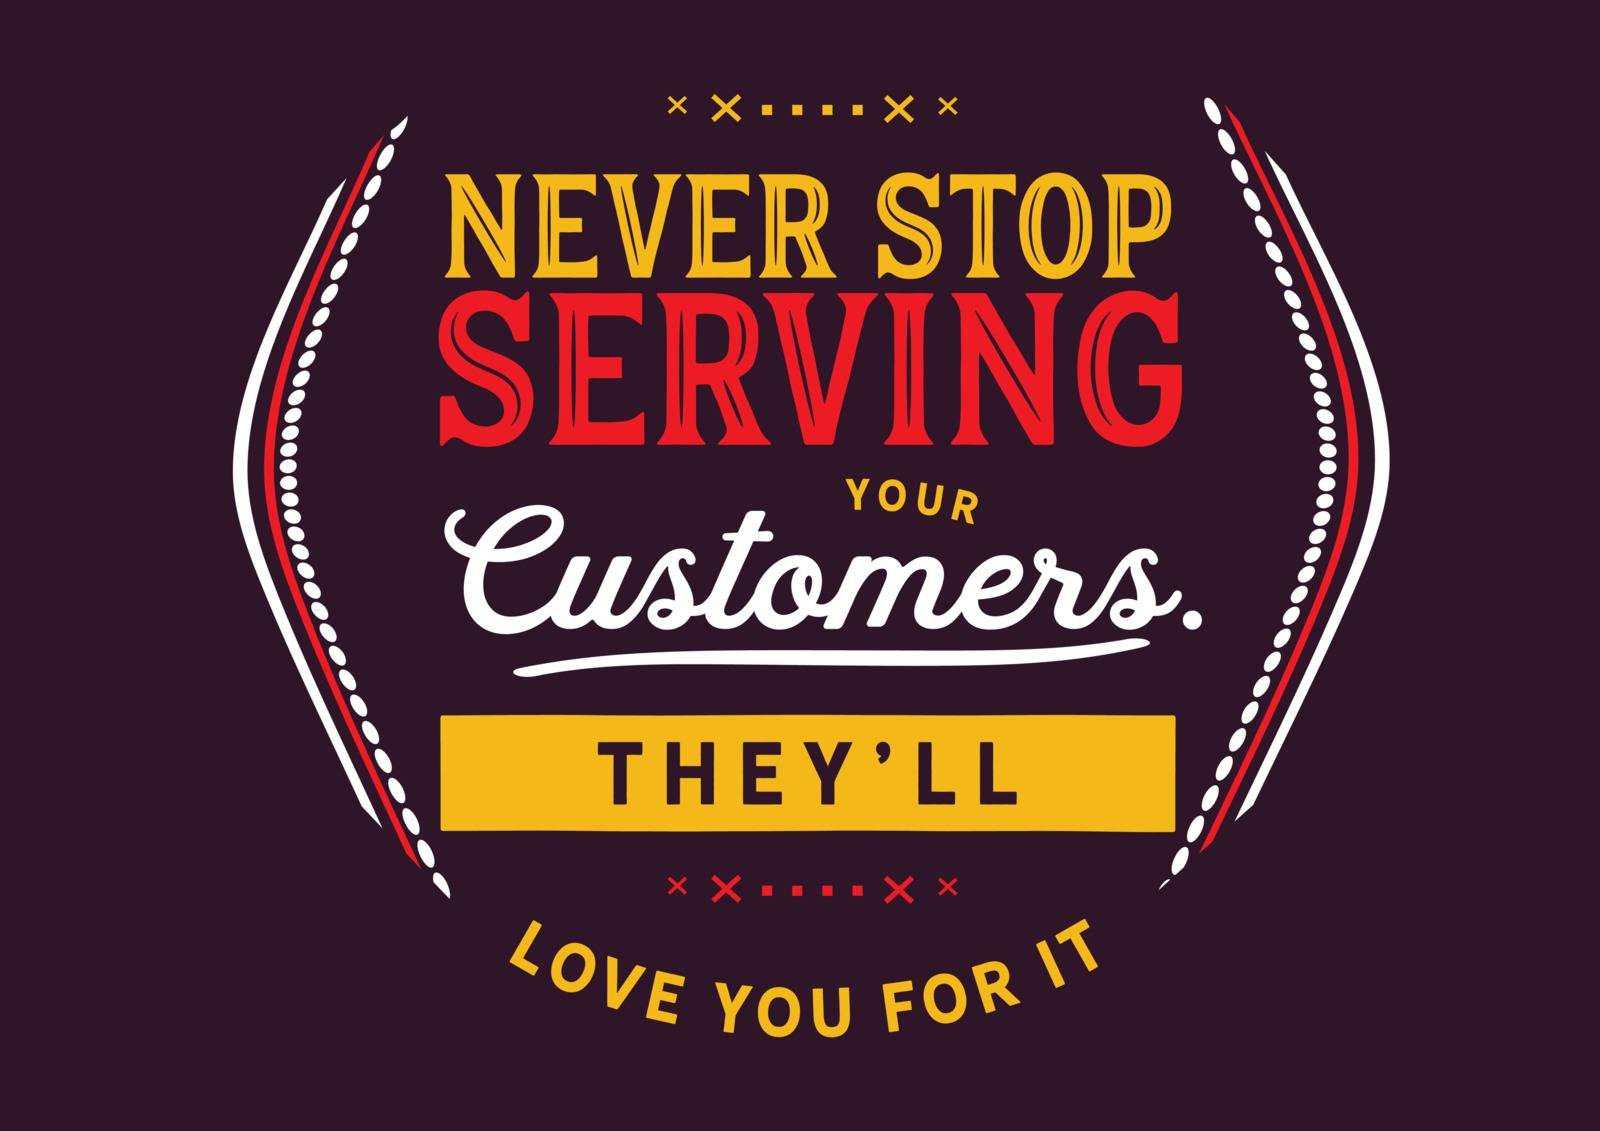 Never stop serving your customers. They'll love you for it.